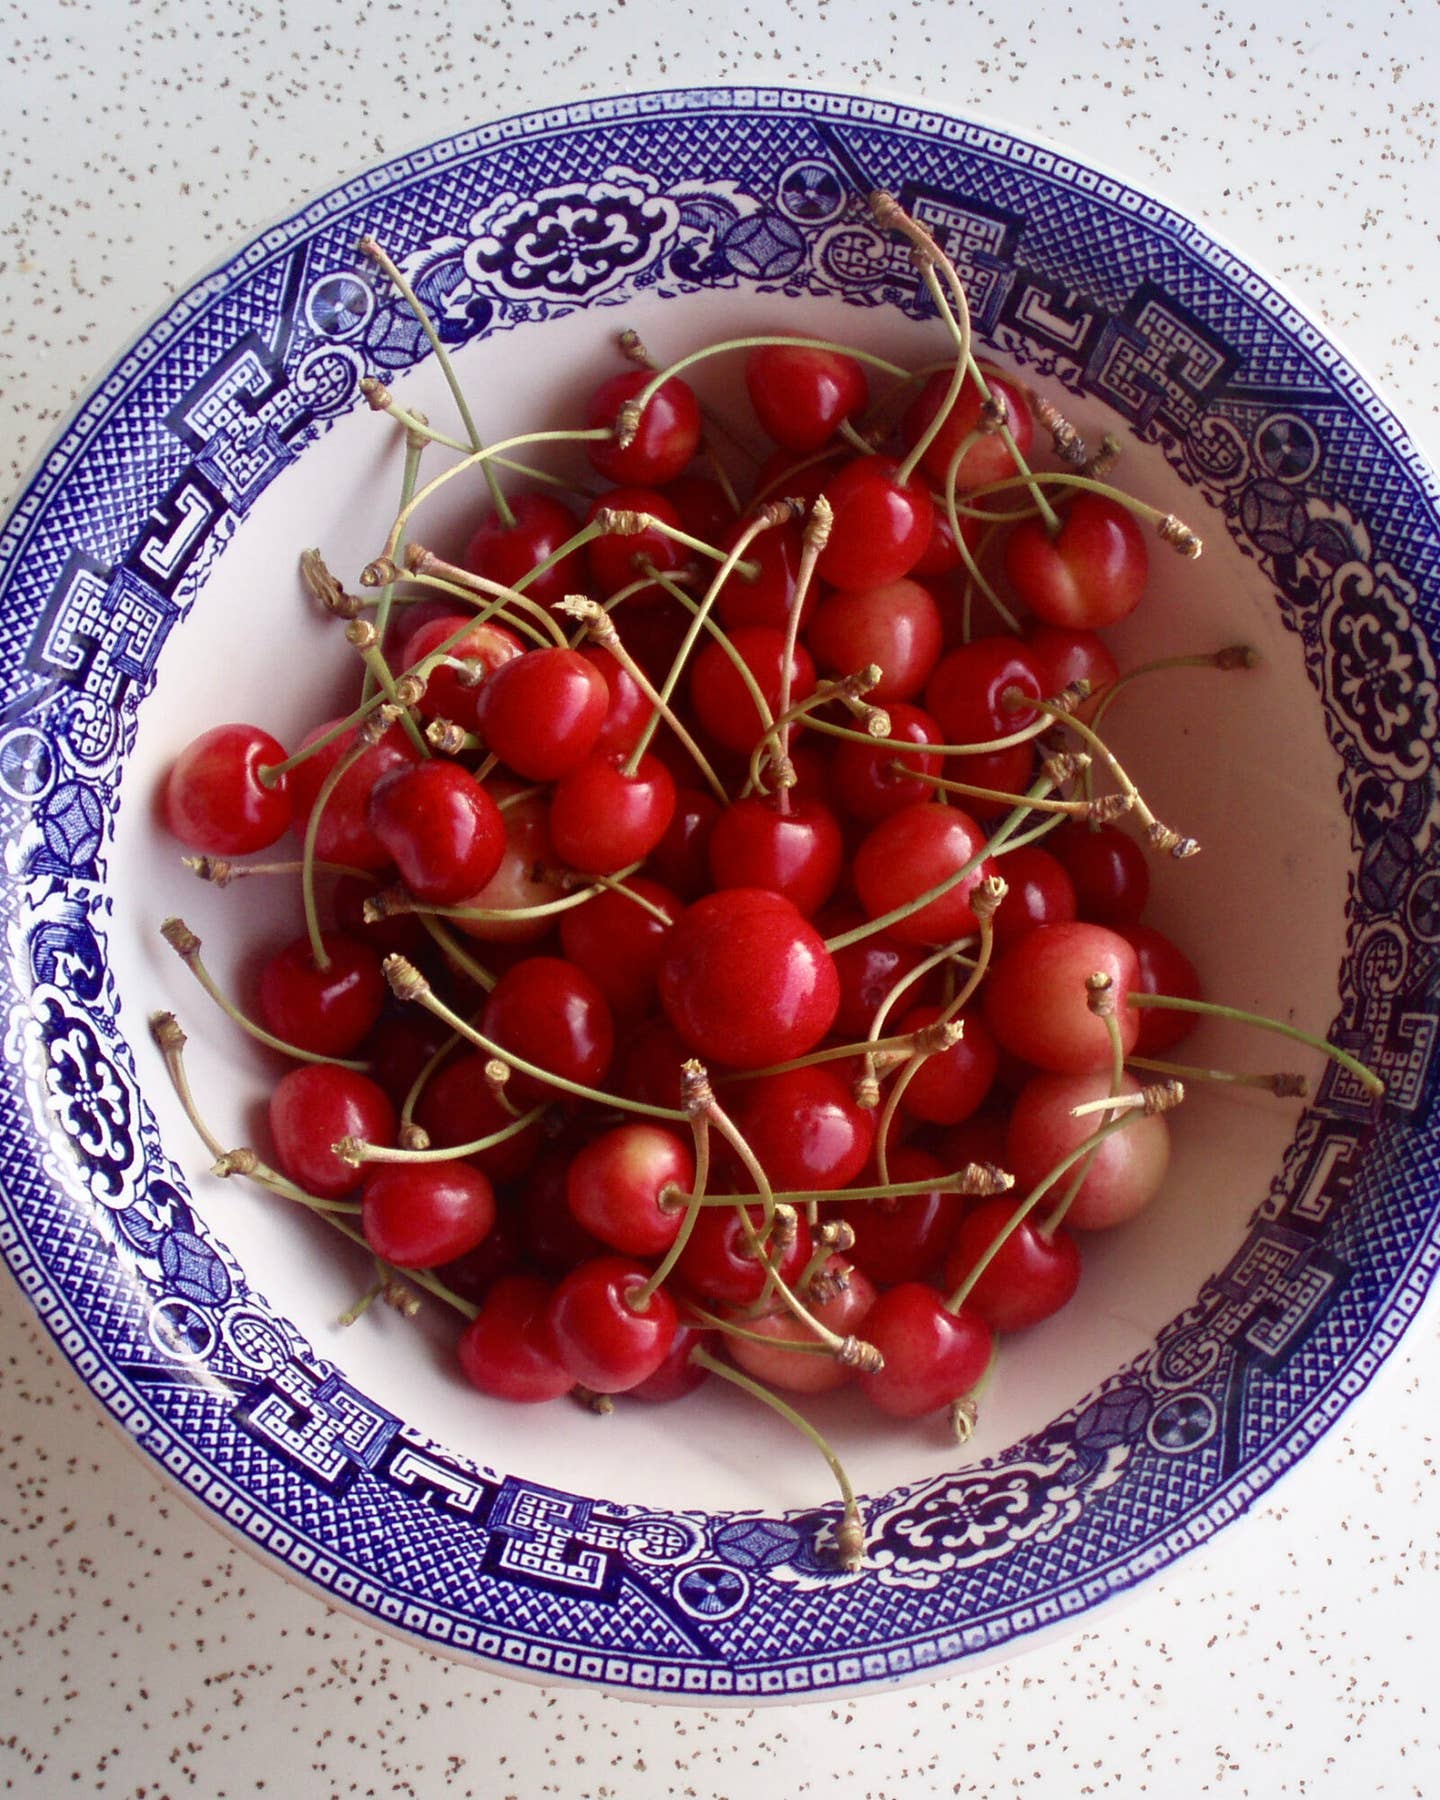 Turns Out, Maraschino Cherries Are the Real-Deal Forbidden Fruit